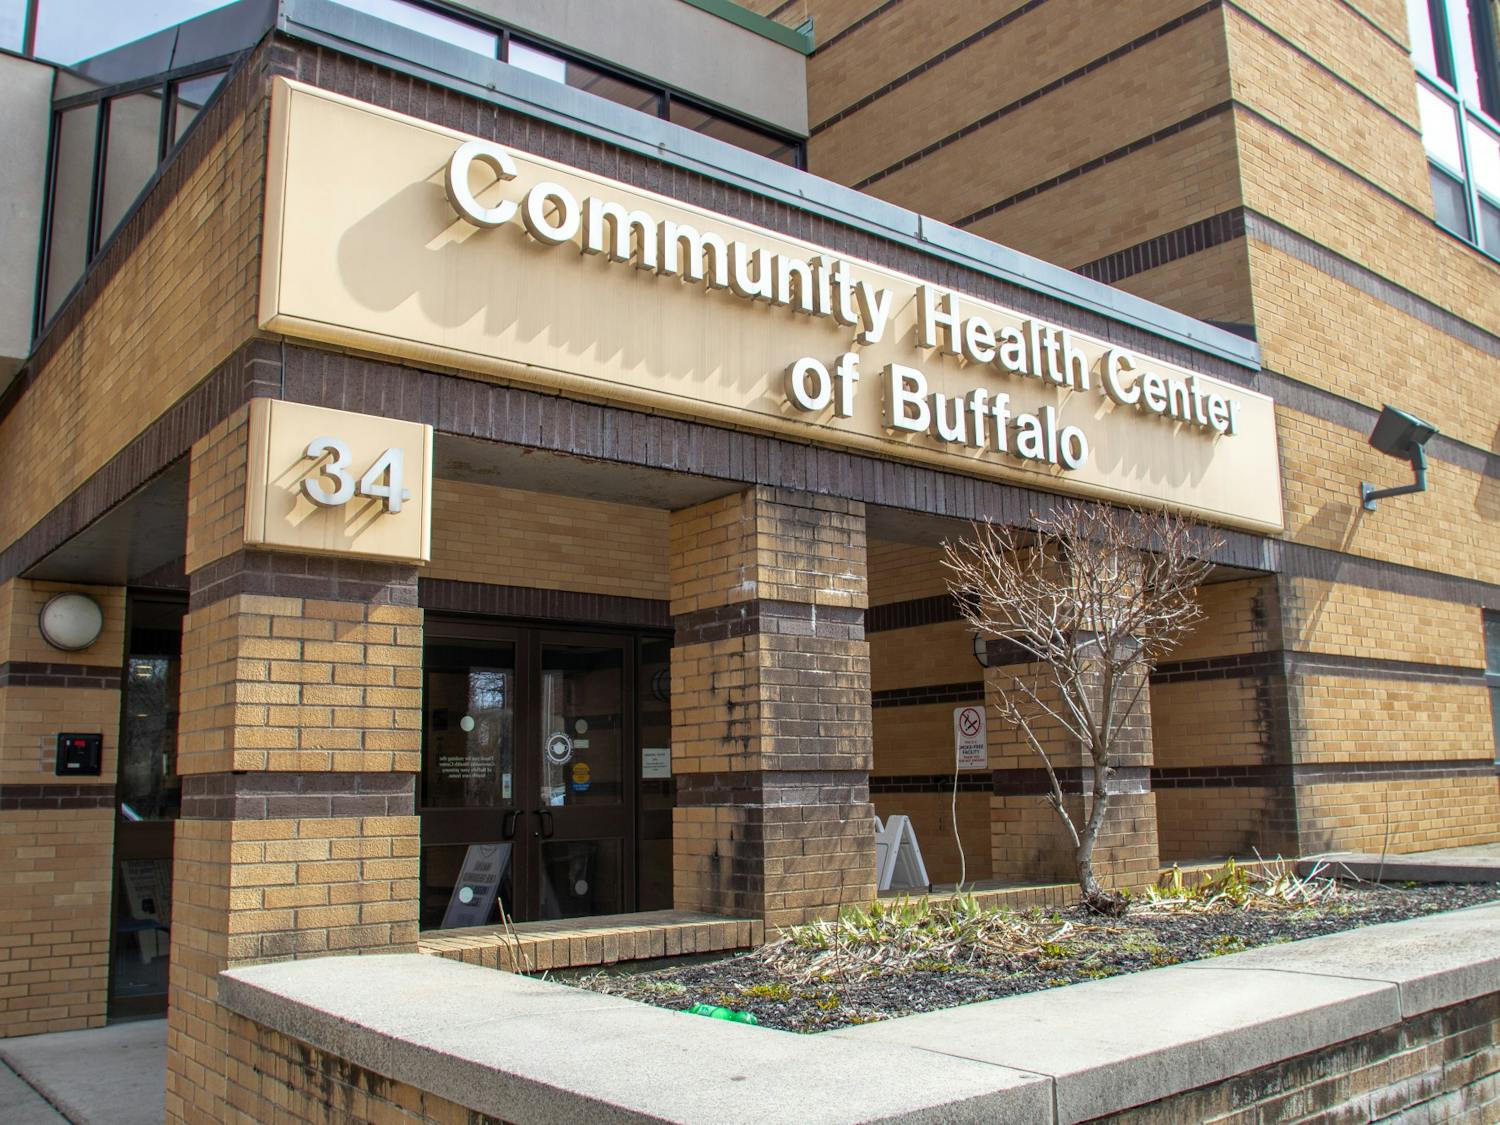 The Lighthouse Free Medical Clinic provides free healthcare to the uninsured and underserved communities in Buffalo, New York.&nbsp;